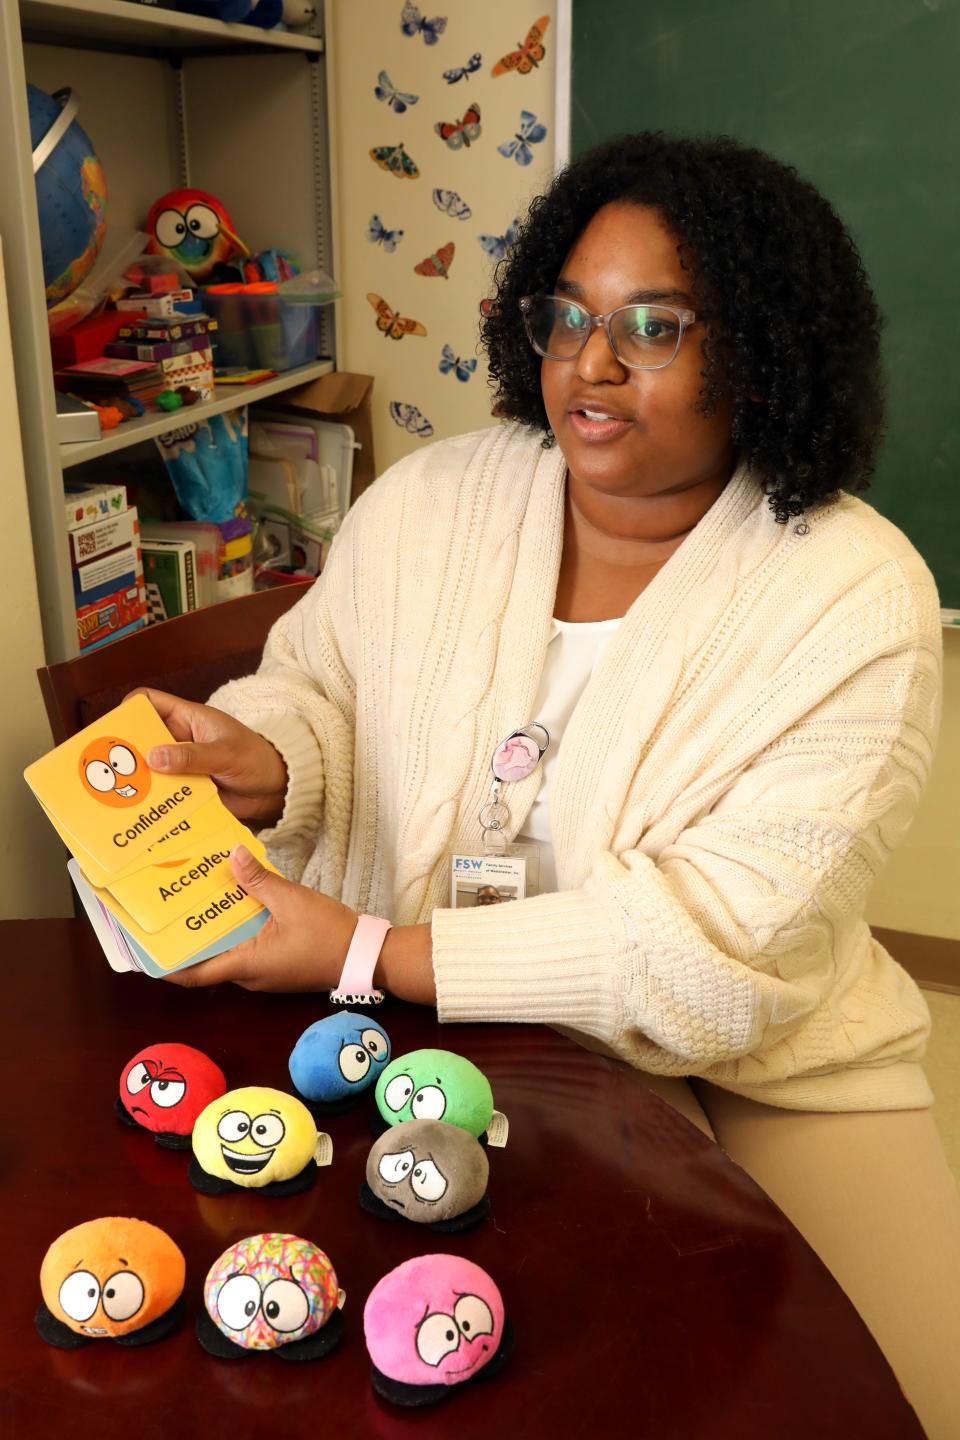 Bilingual mental health clinician Jennifer German shows the flash cards and plush toys she uses to discuss feelings with students at Park Avenue School in Port Chester March 6, 2024. She is employed by Family Services of Westchester and has an office in the school for the students to access therapy without leaving the building.